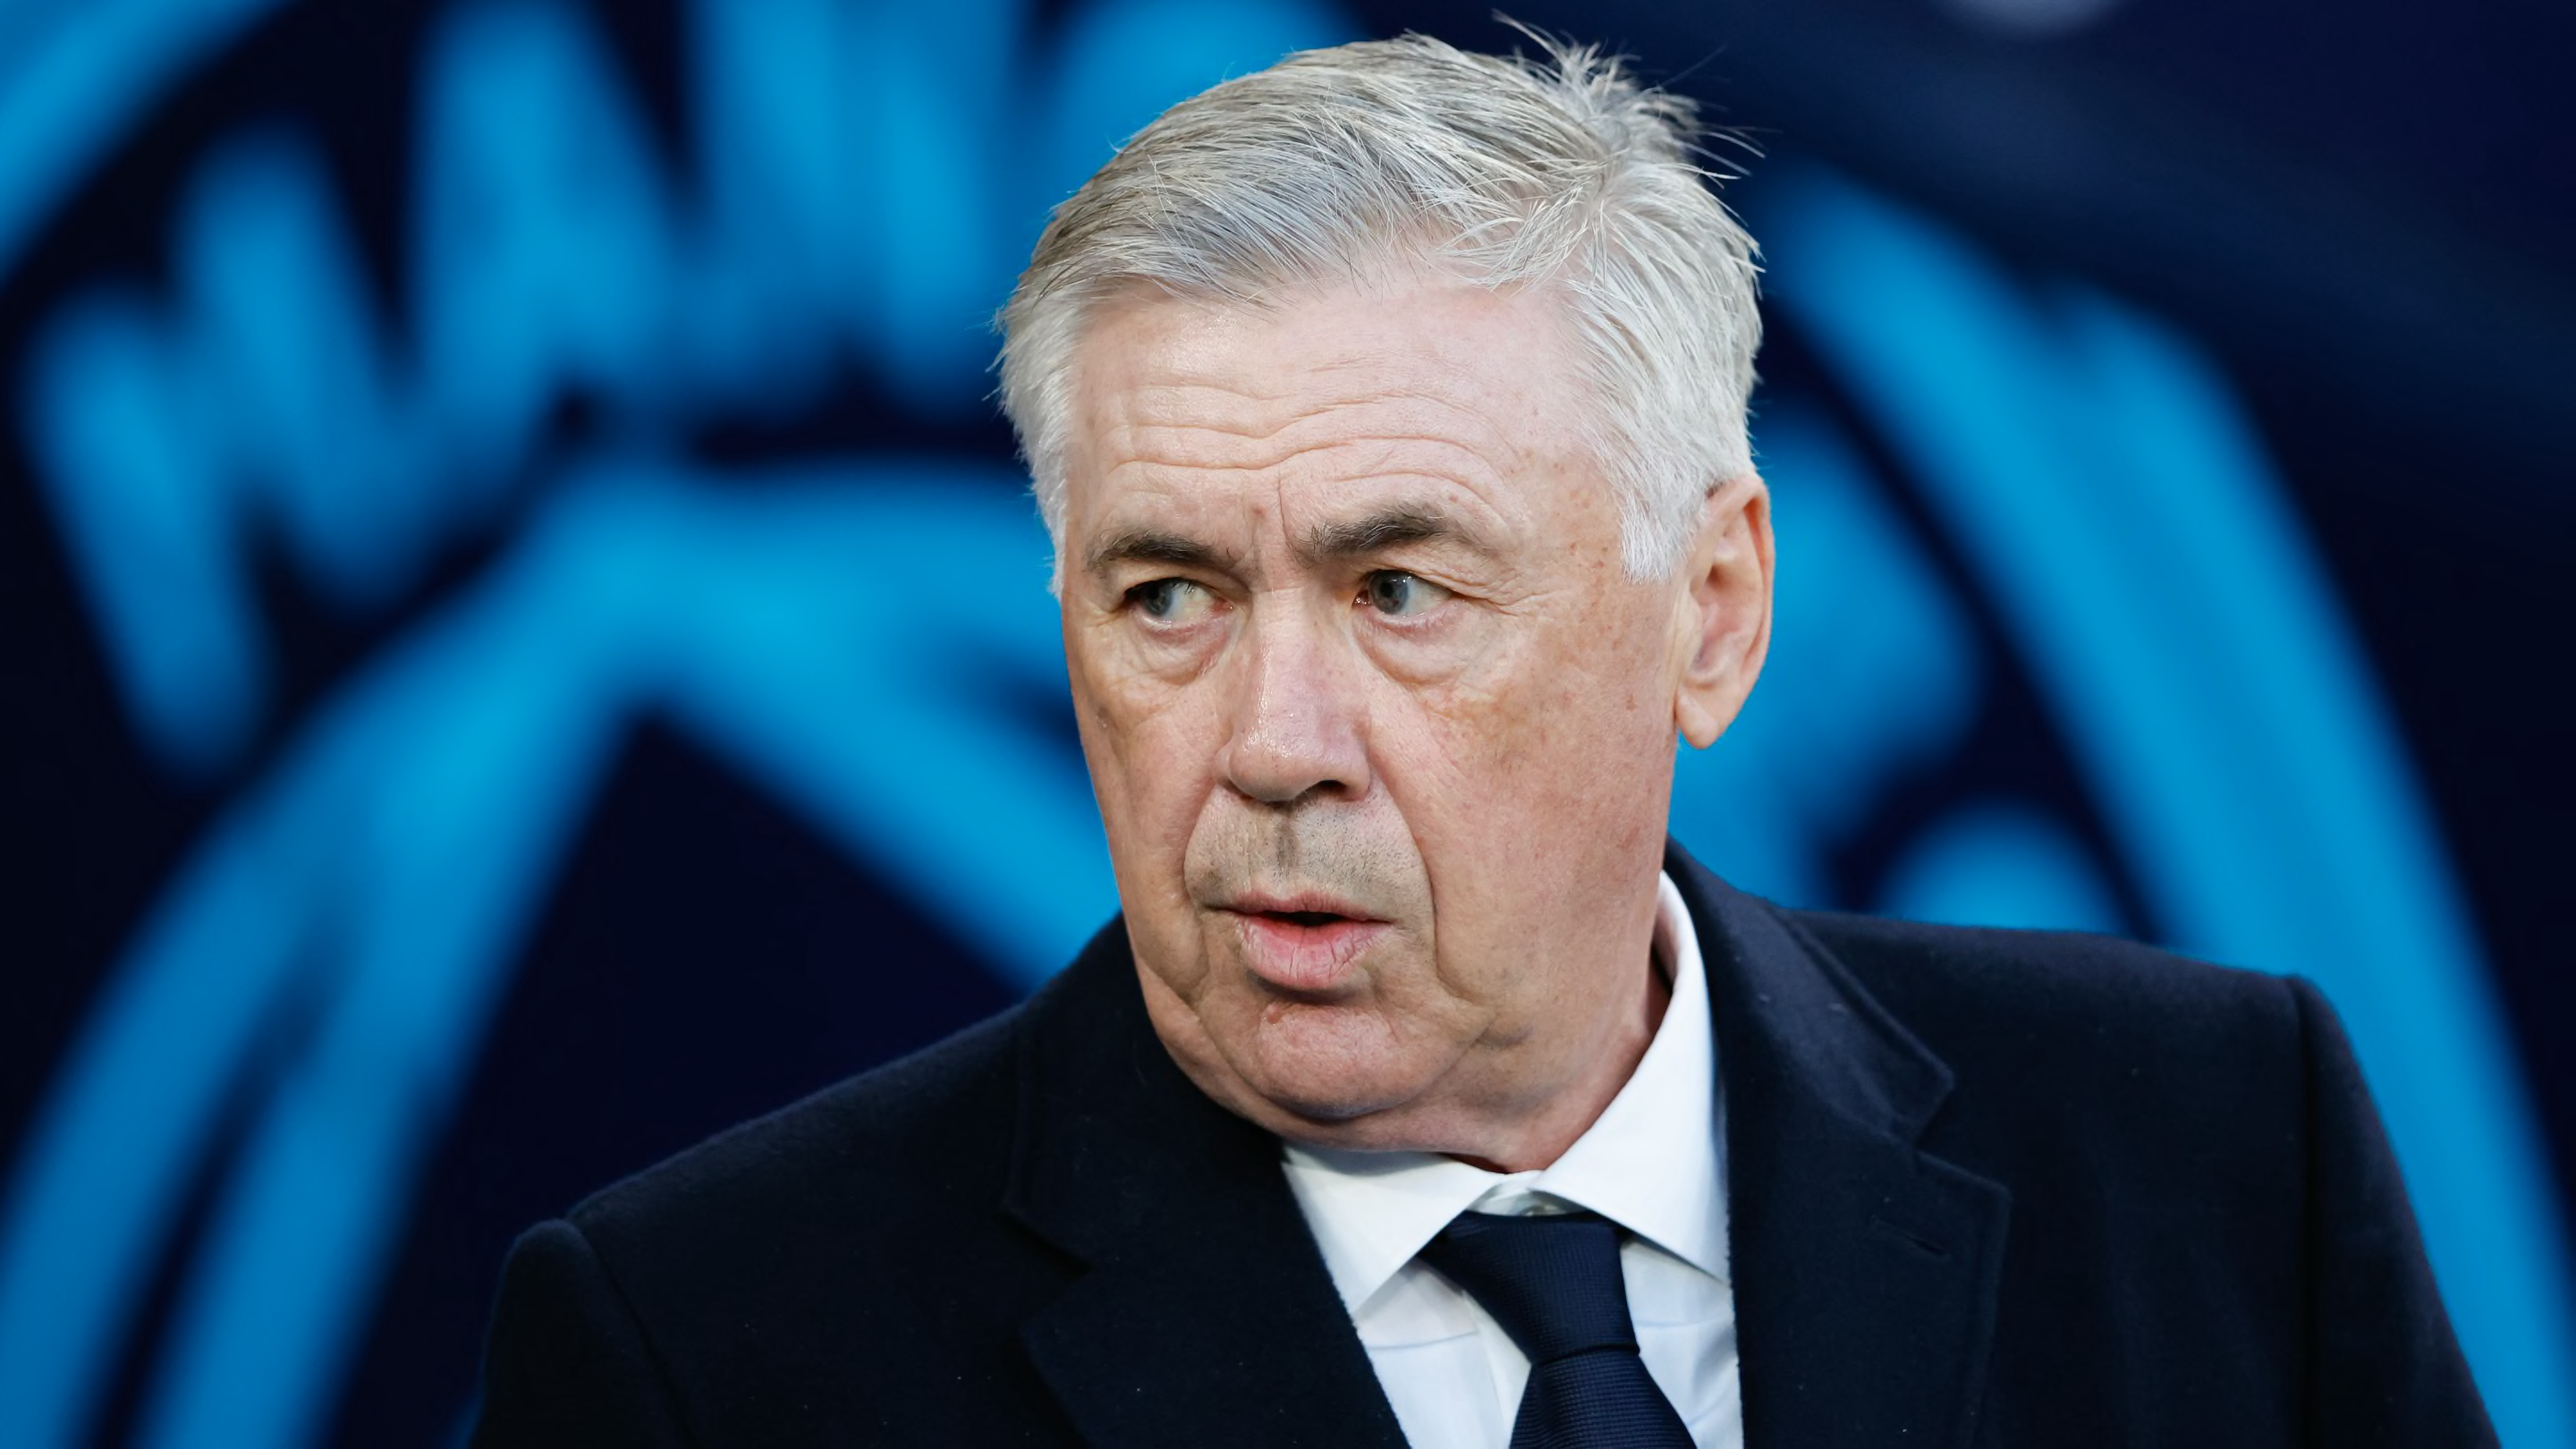 Carlo Ancelotti defends Real Madrid's tactics in victory over Man City